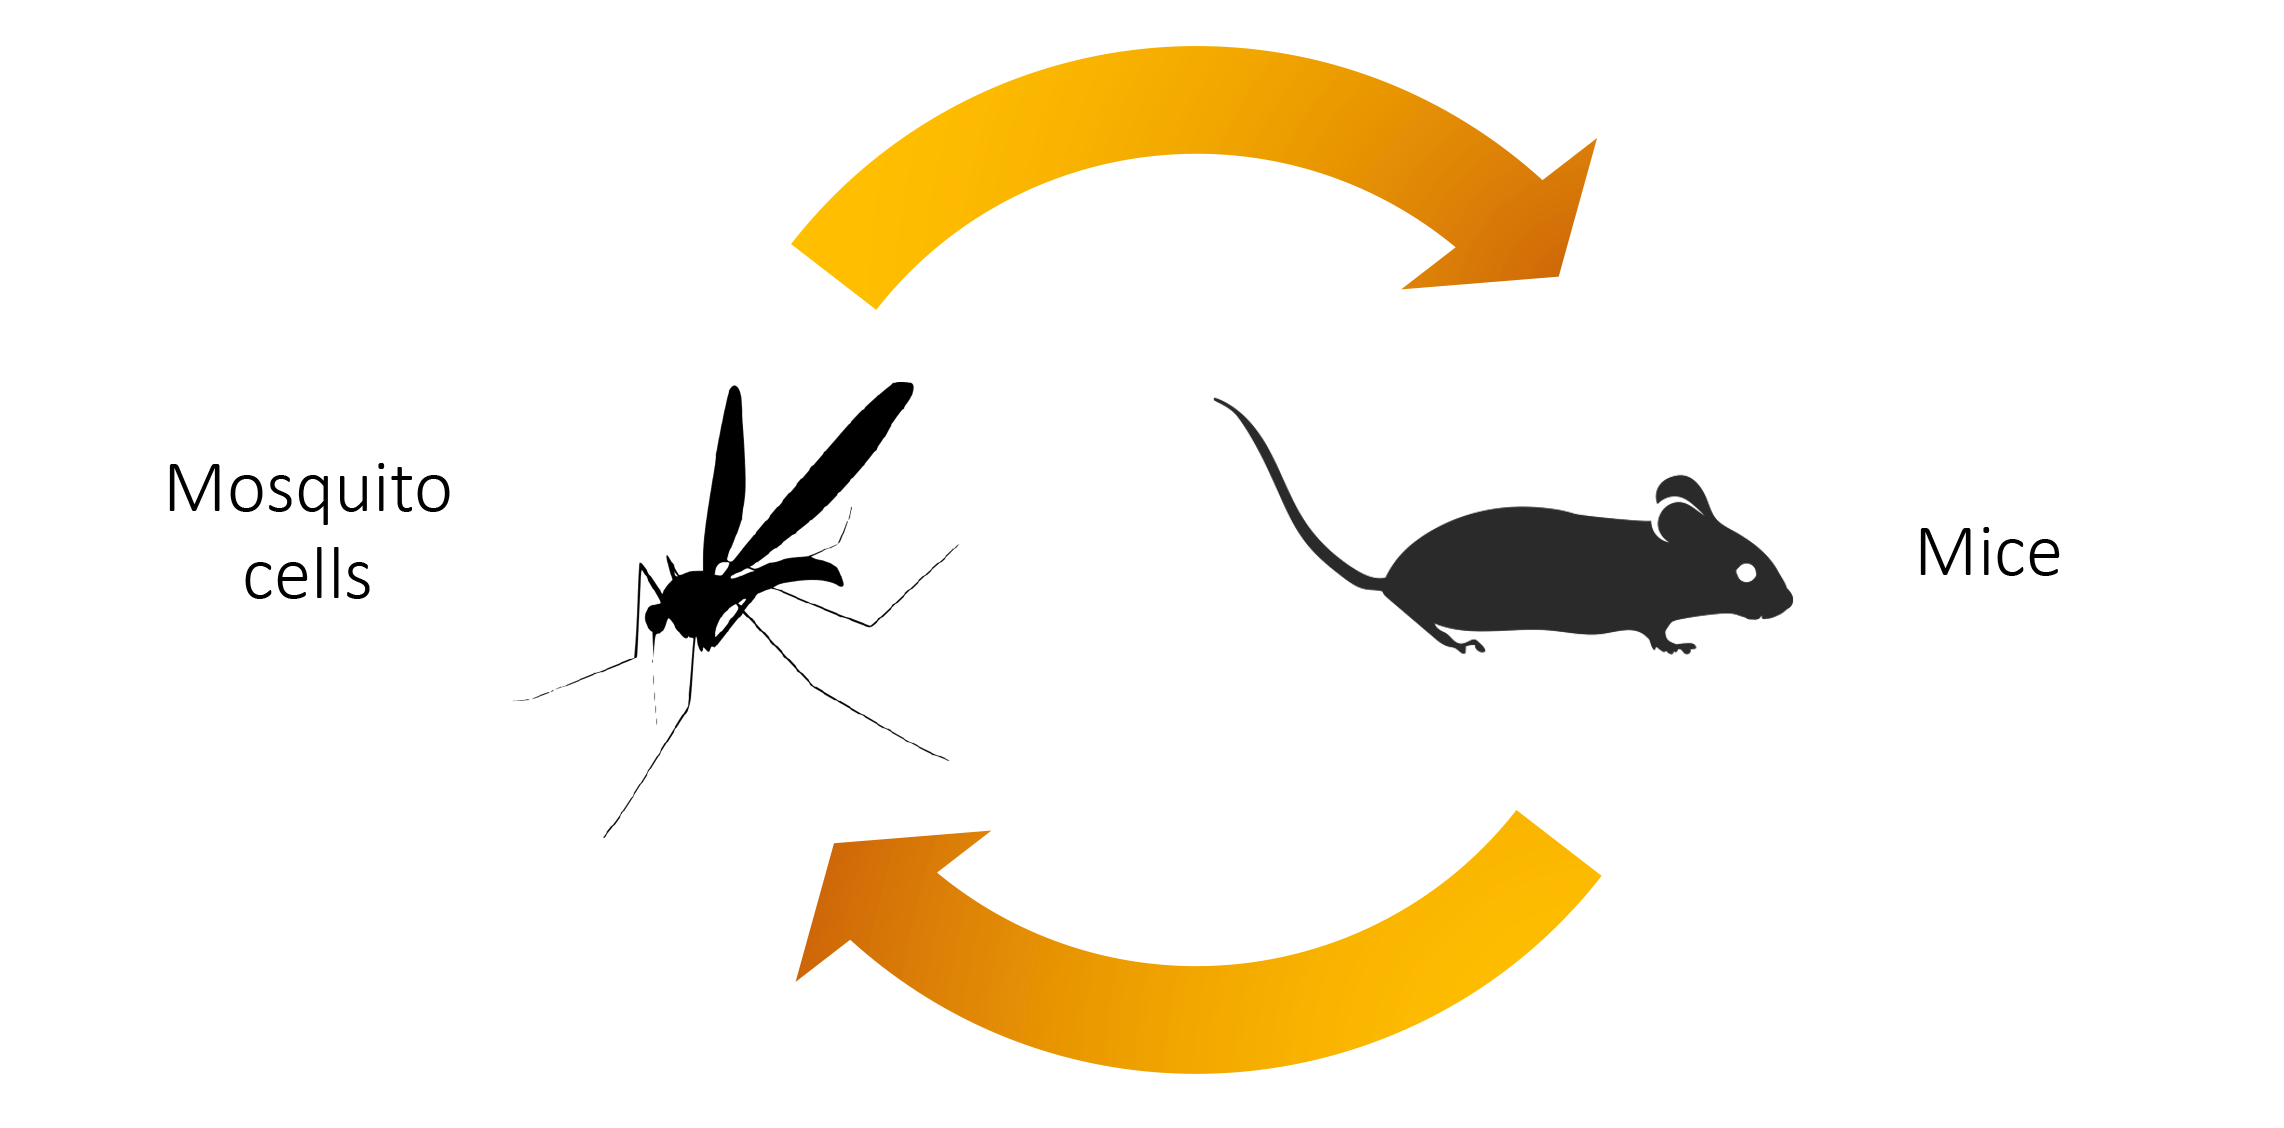 Repeatedly switching back and forth between mosquito cells and mice provided scientists with a window into how Zika virus naturally evolves as it encounters more hosts.